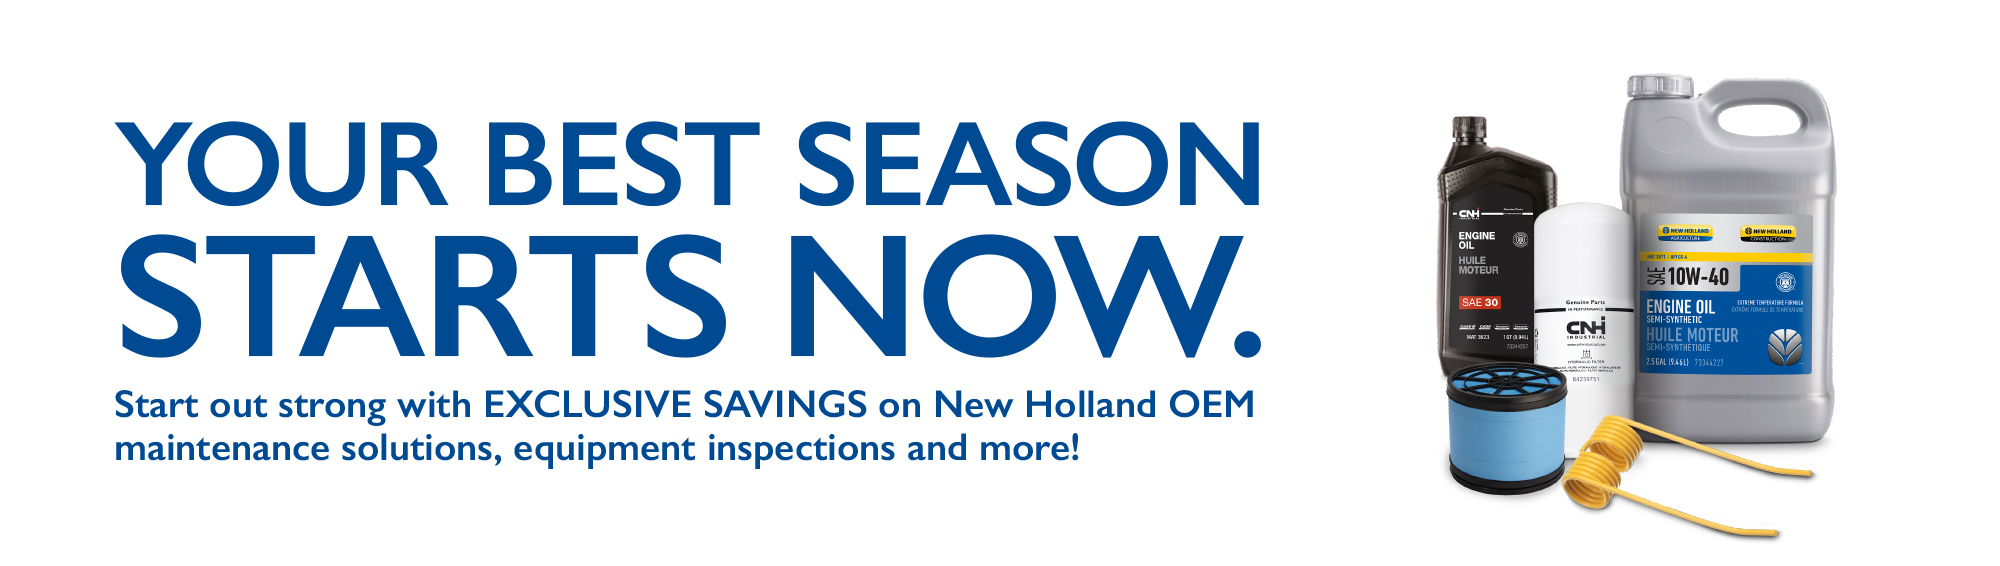 REAP THE REWARDS | Enjoy the end of another season with EXCLUSIVE OFFERS!